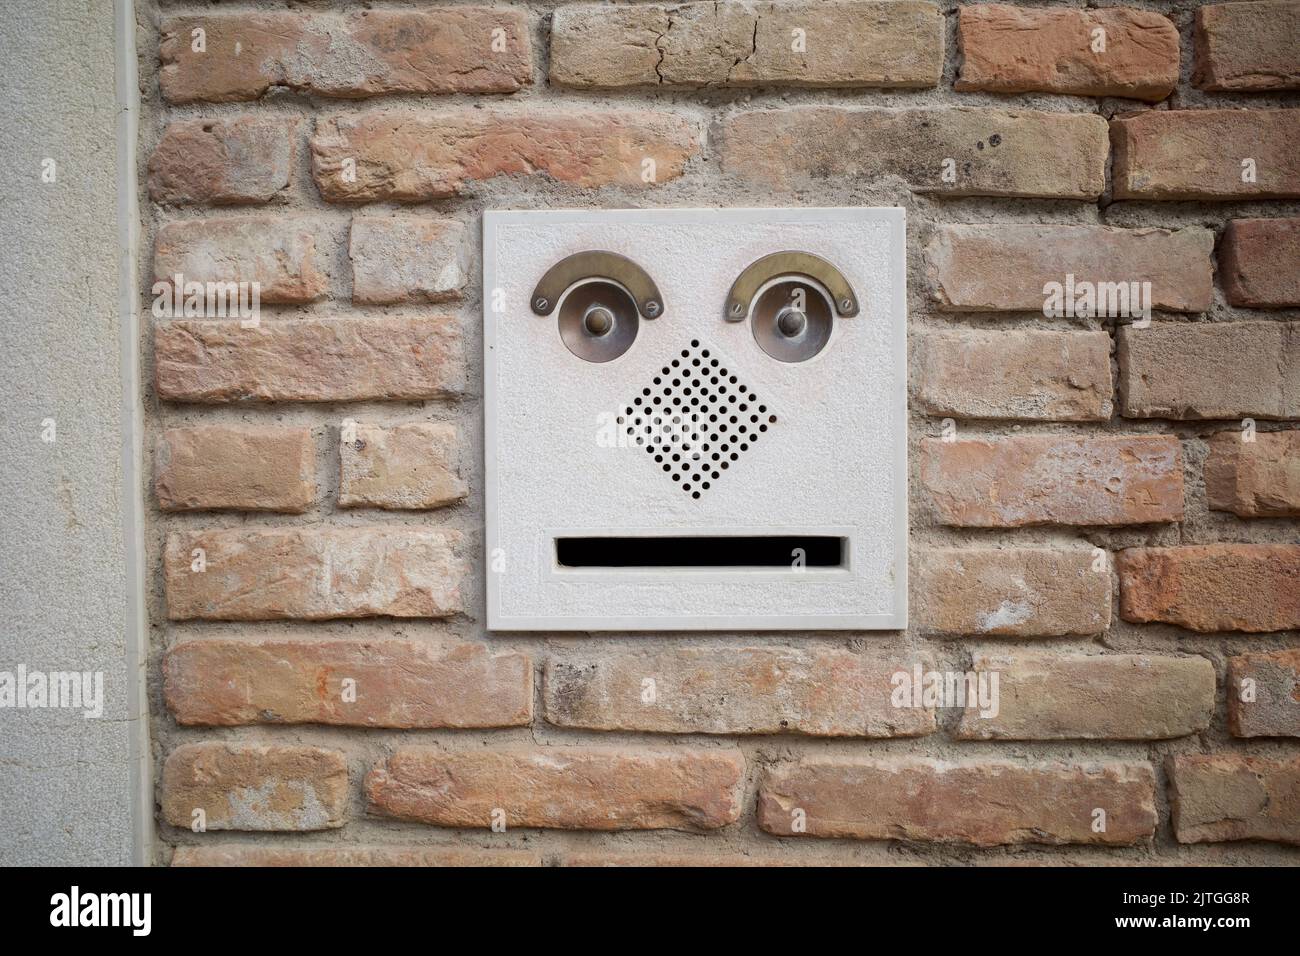 Common door bells in Venice, Italy. The design makes it look like a face with eyes, eyebrows, nose, and mouth. Stock Photo